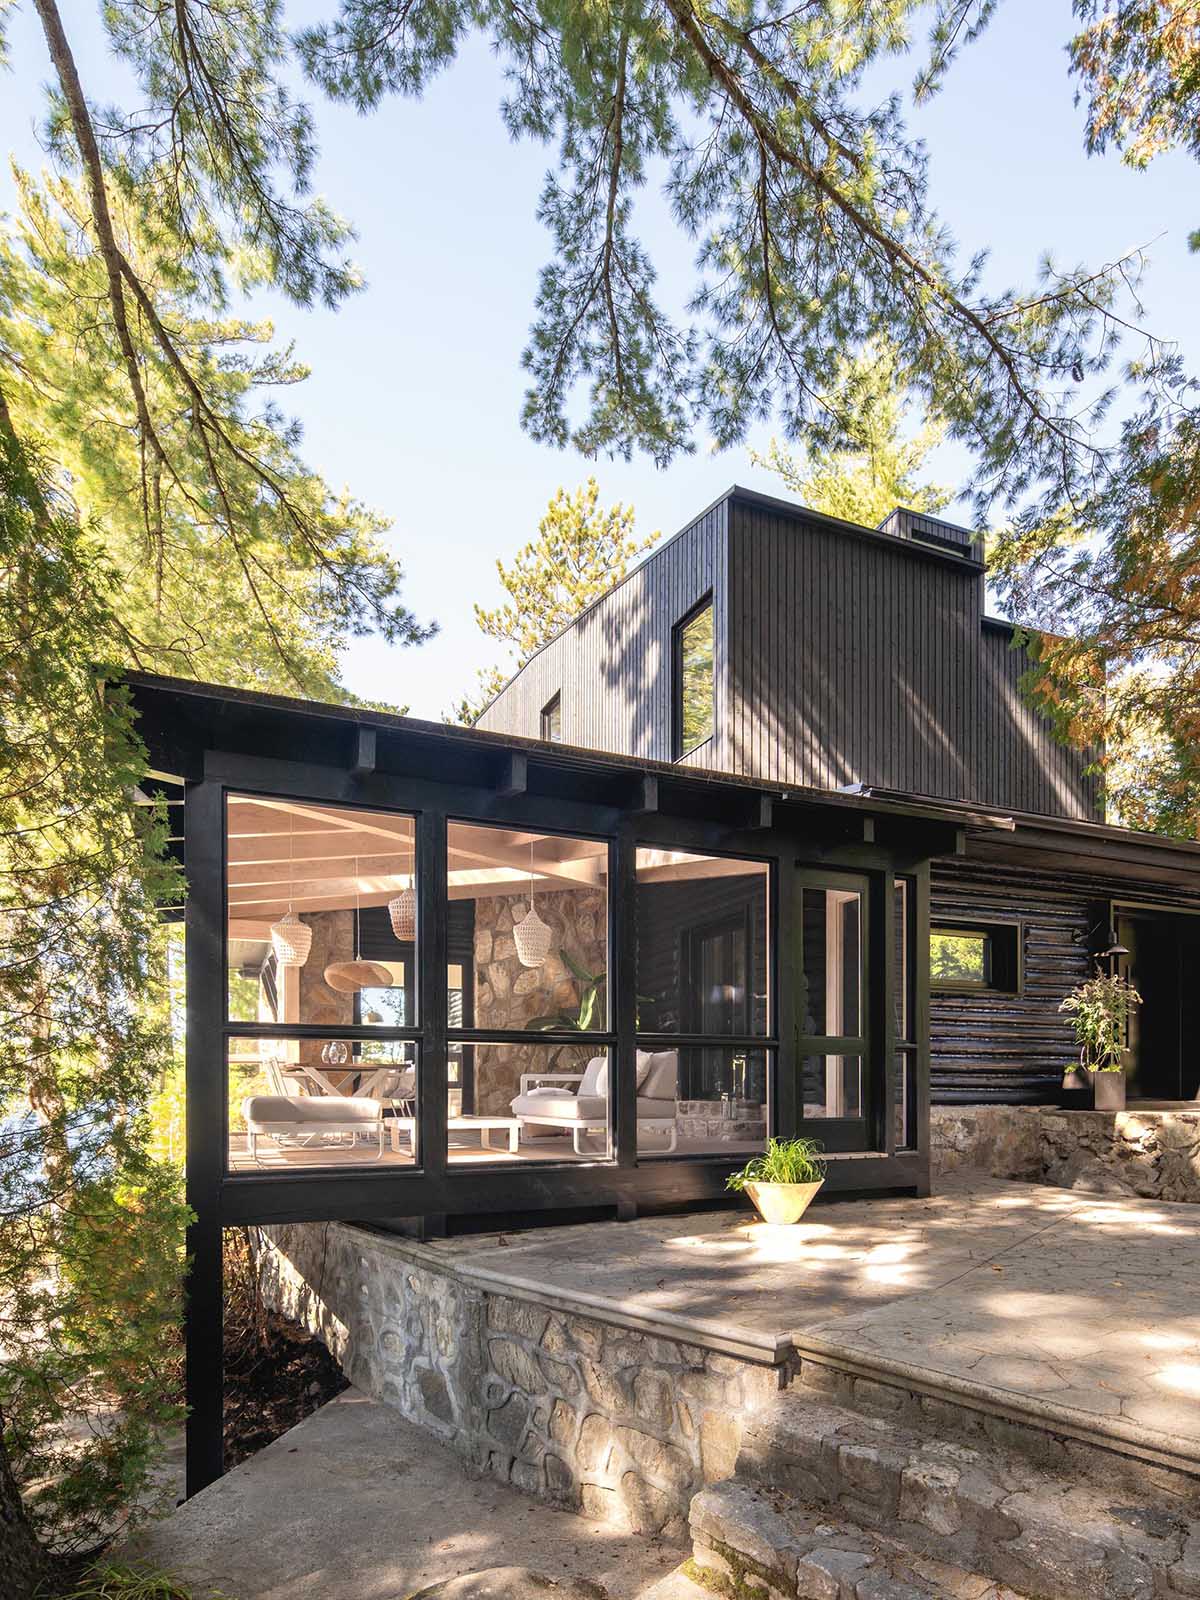 A log cabin with a stone foundation has a modern extension and screened-in porch.